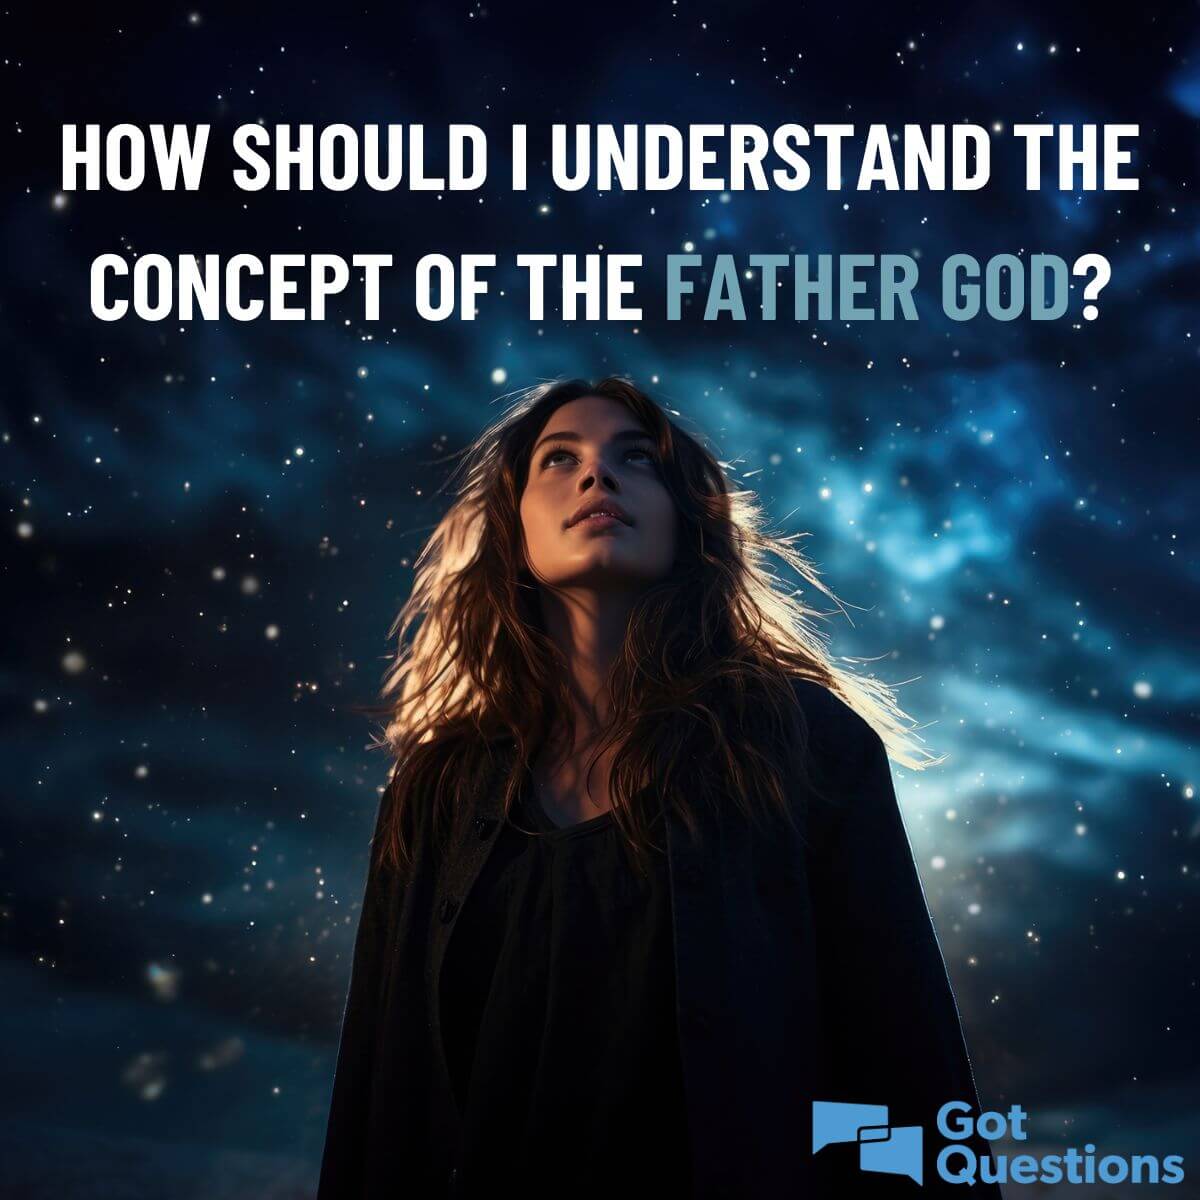 God the Father: Our Loving and Compassionate Heavenly Father